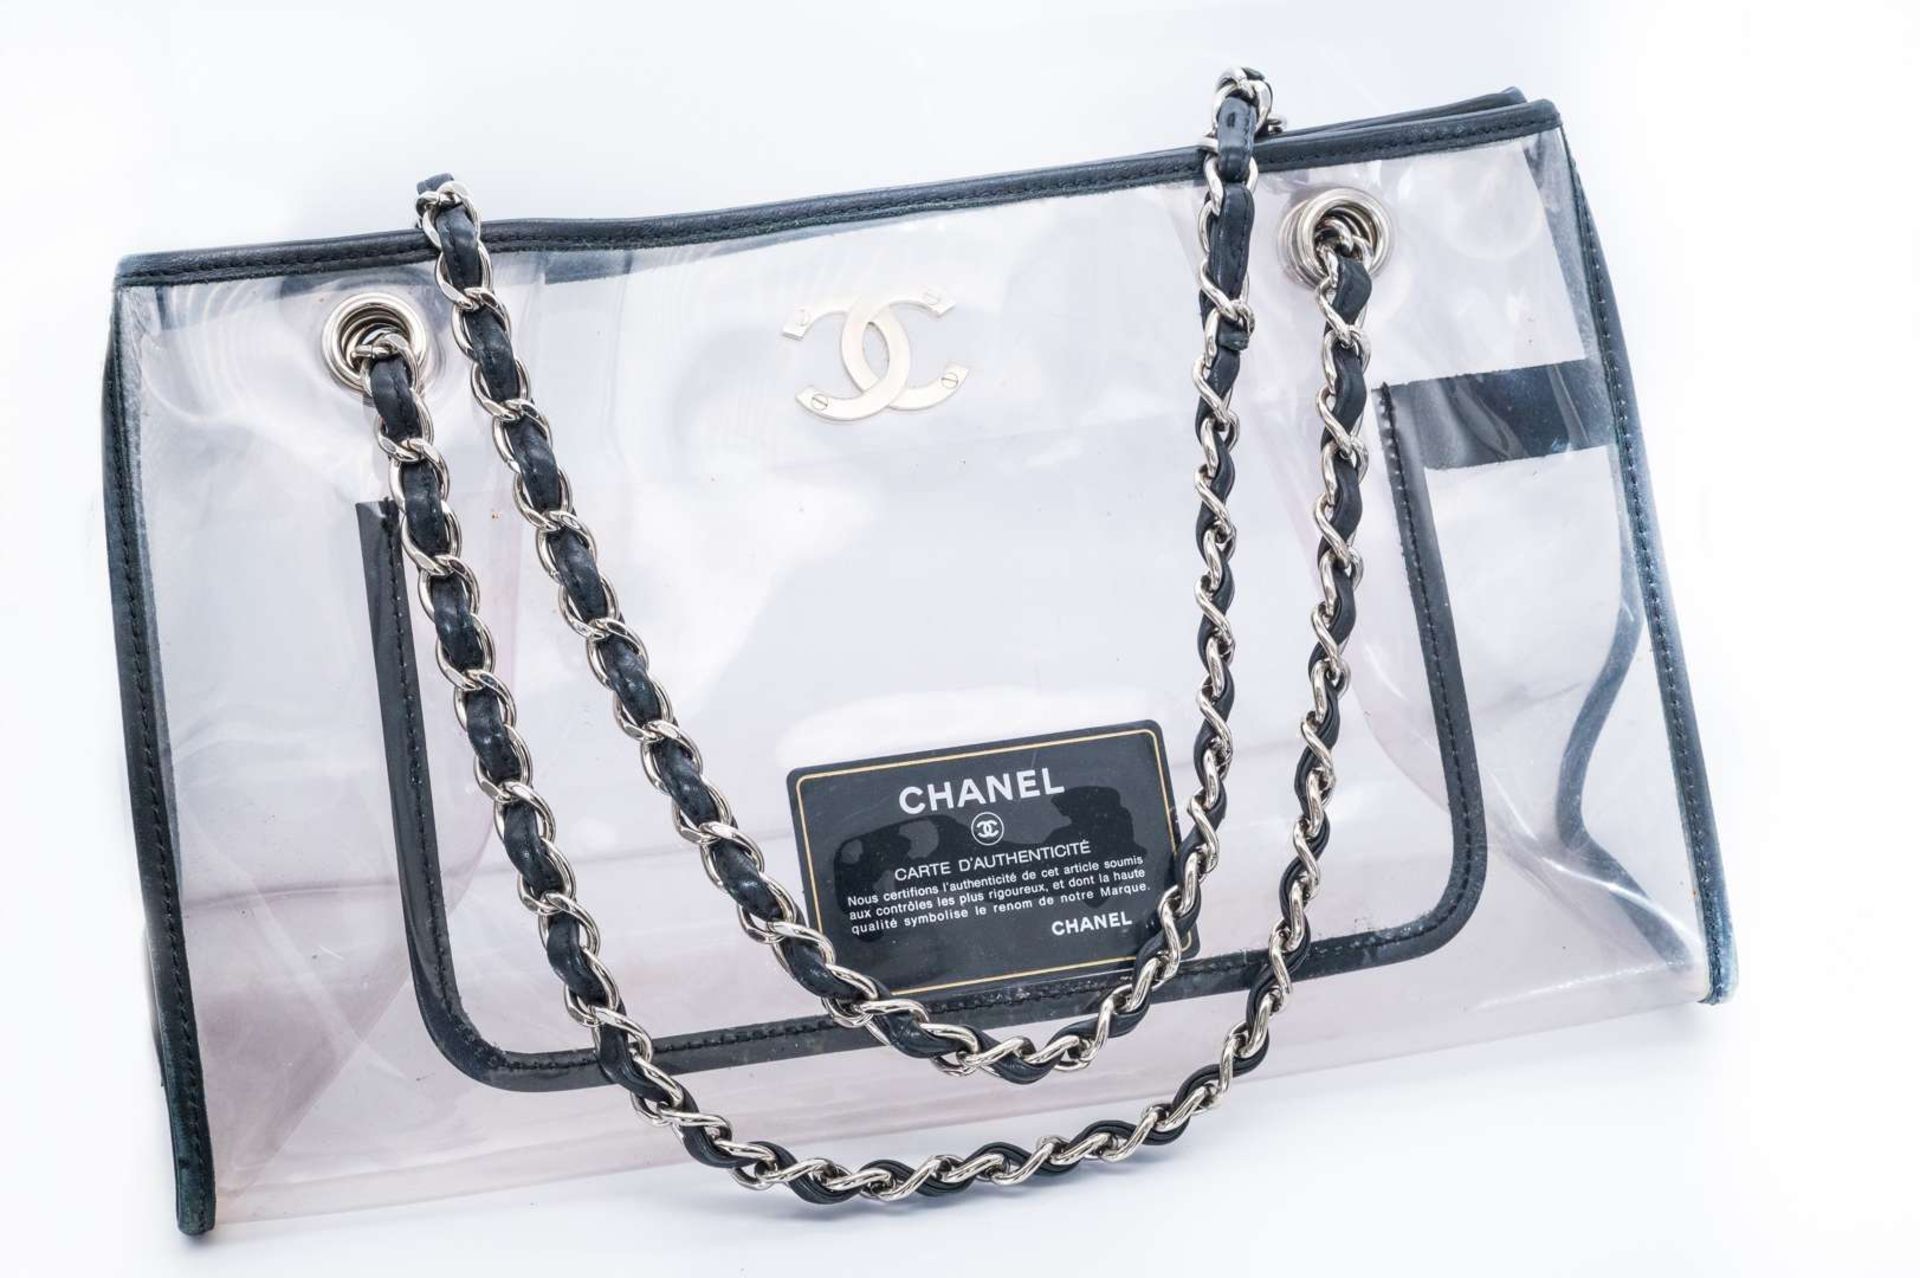 CHANEL, PVC tote bag, with black leather trim and silver curb link chain carry strap. 2006-2008 - Image 2 of 4